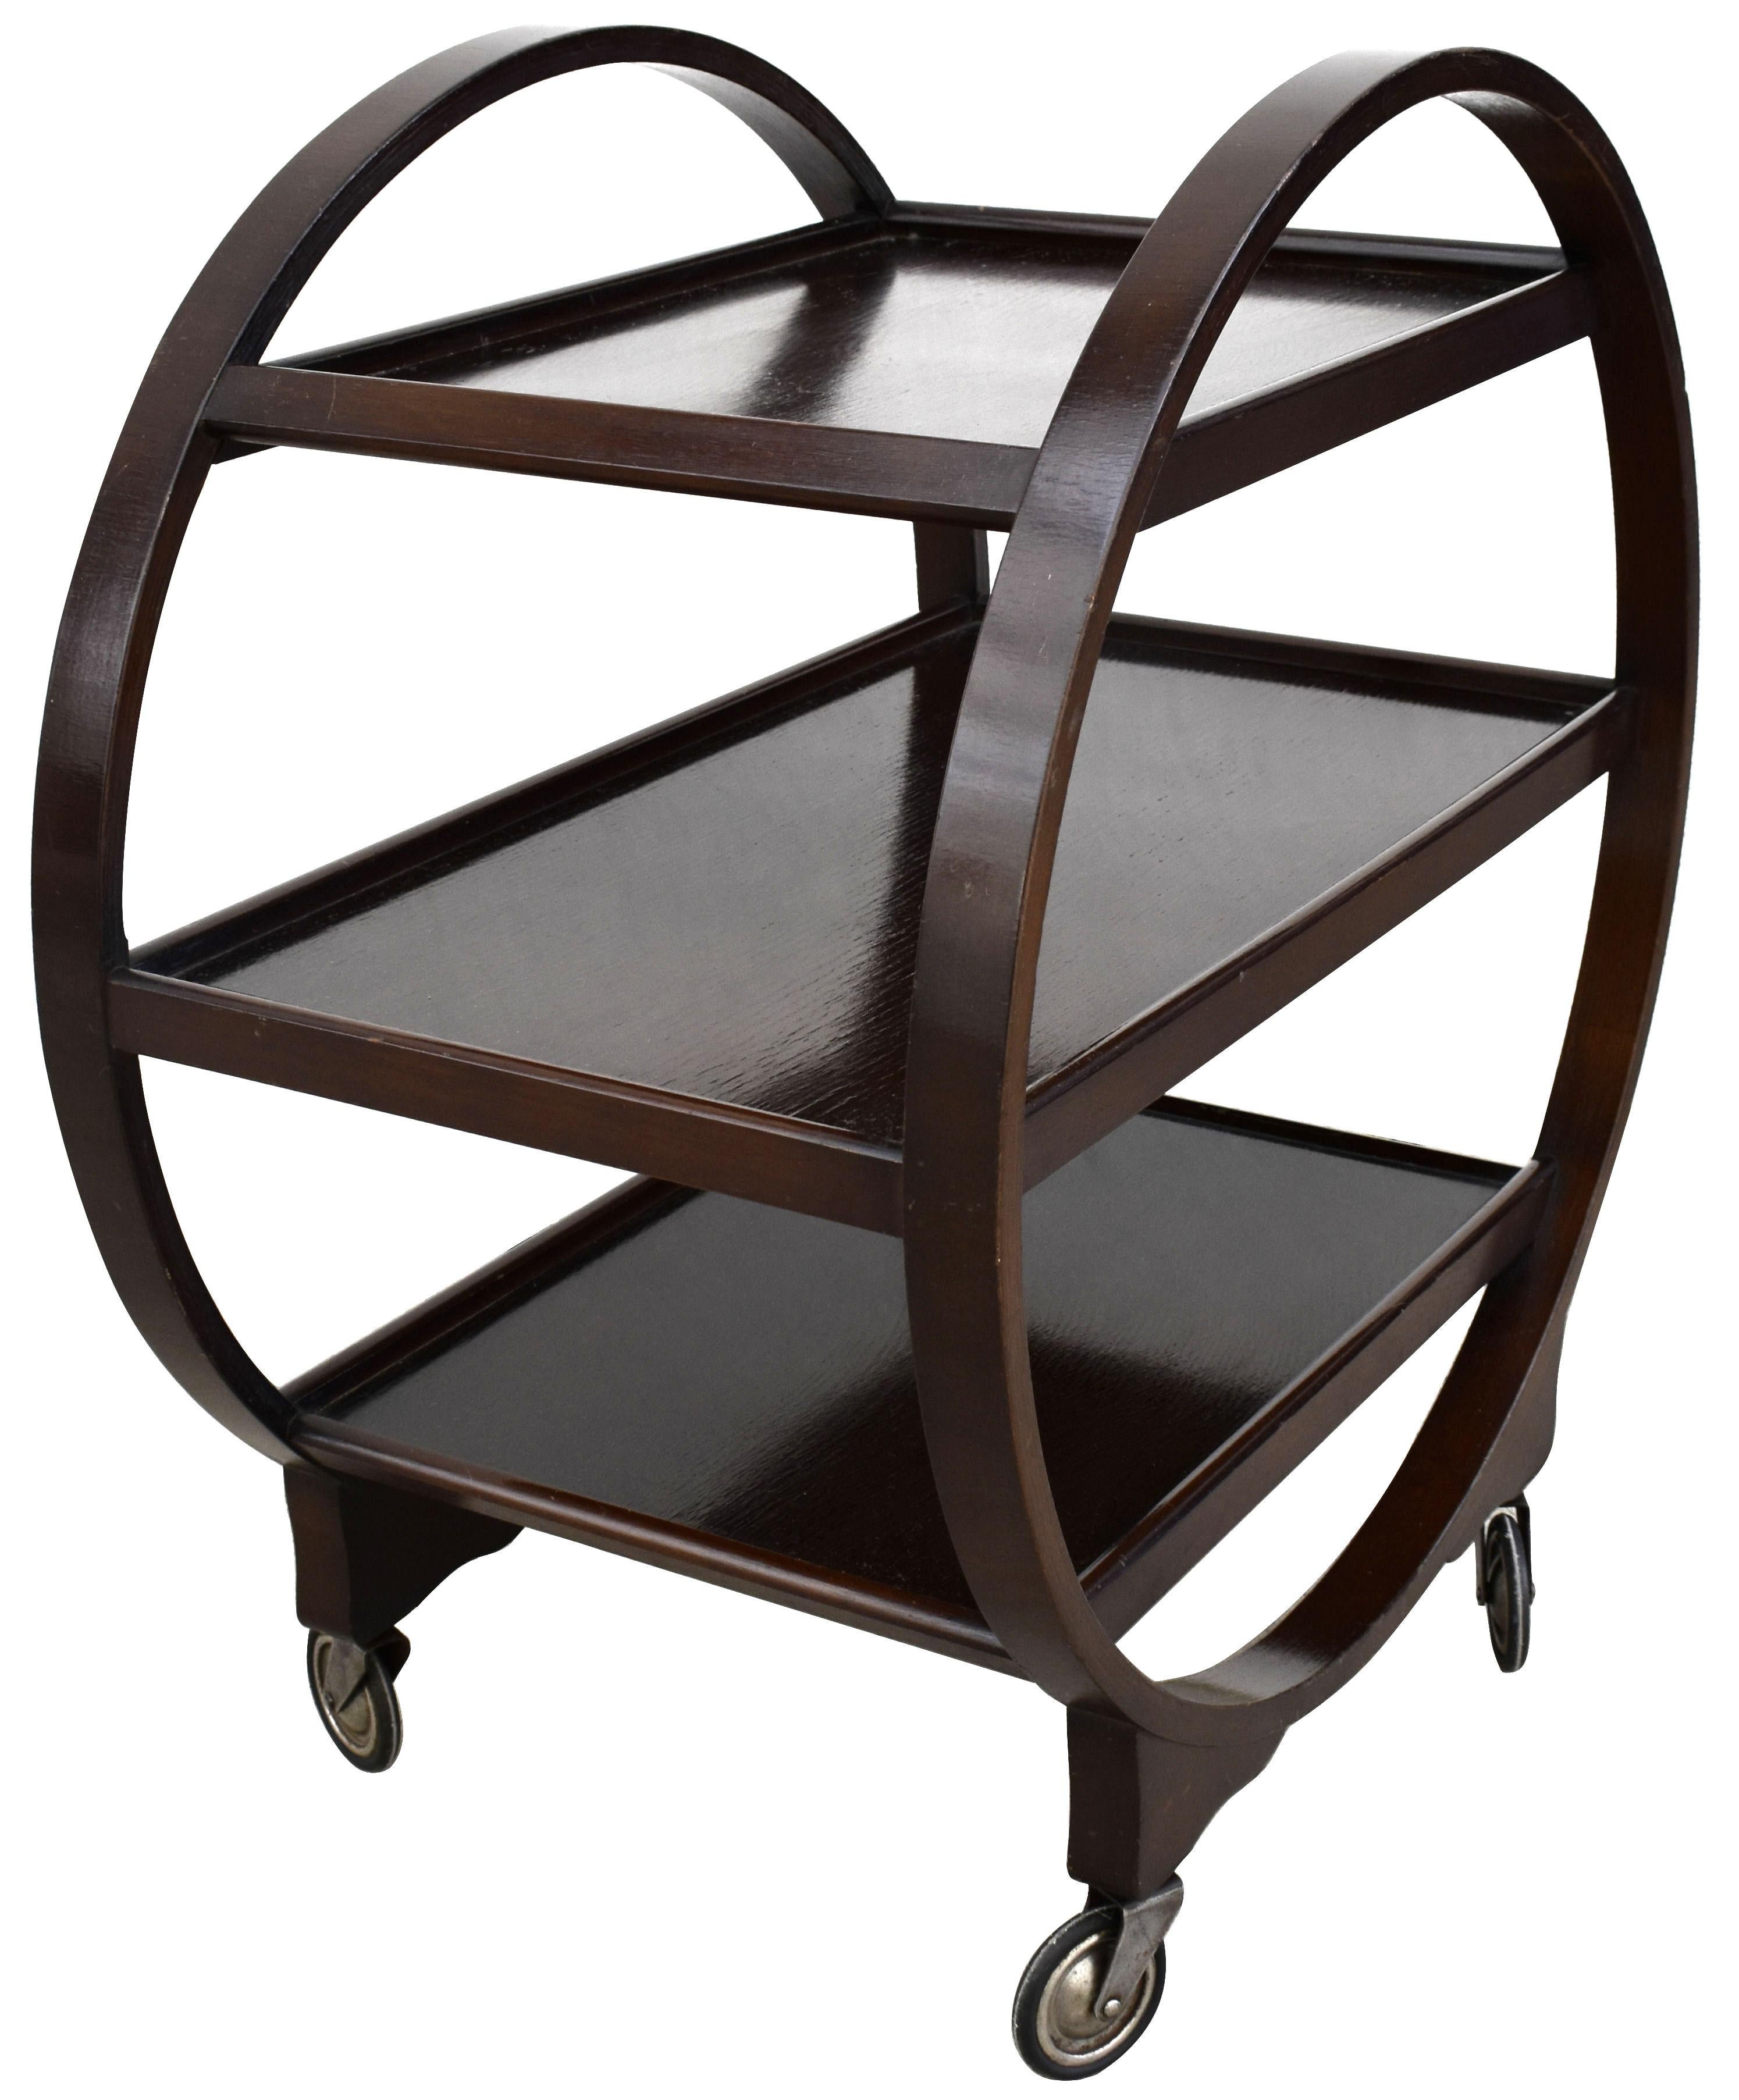 Very attractive and iconic English Art Deco Savoy Hostess trolley cart dating from the 1920s-1930s period. This three-tiered trolley not only looks awesome but is very functional too. Solid walnut in a very dark tone coloring with chrome and rubber